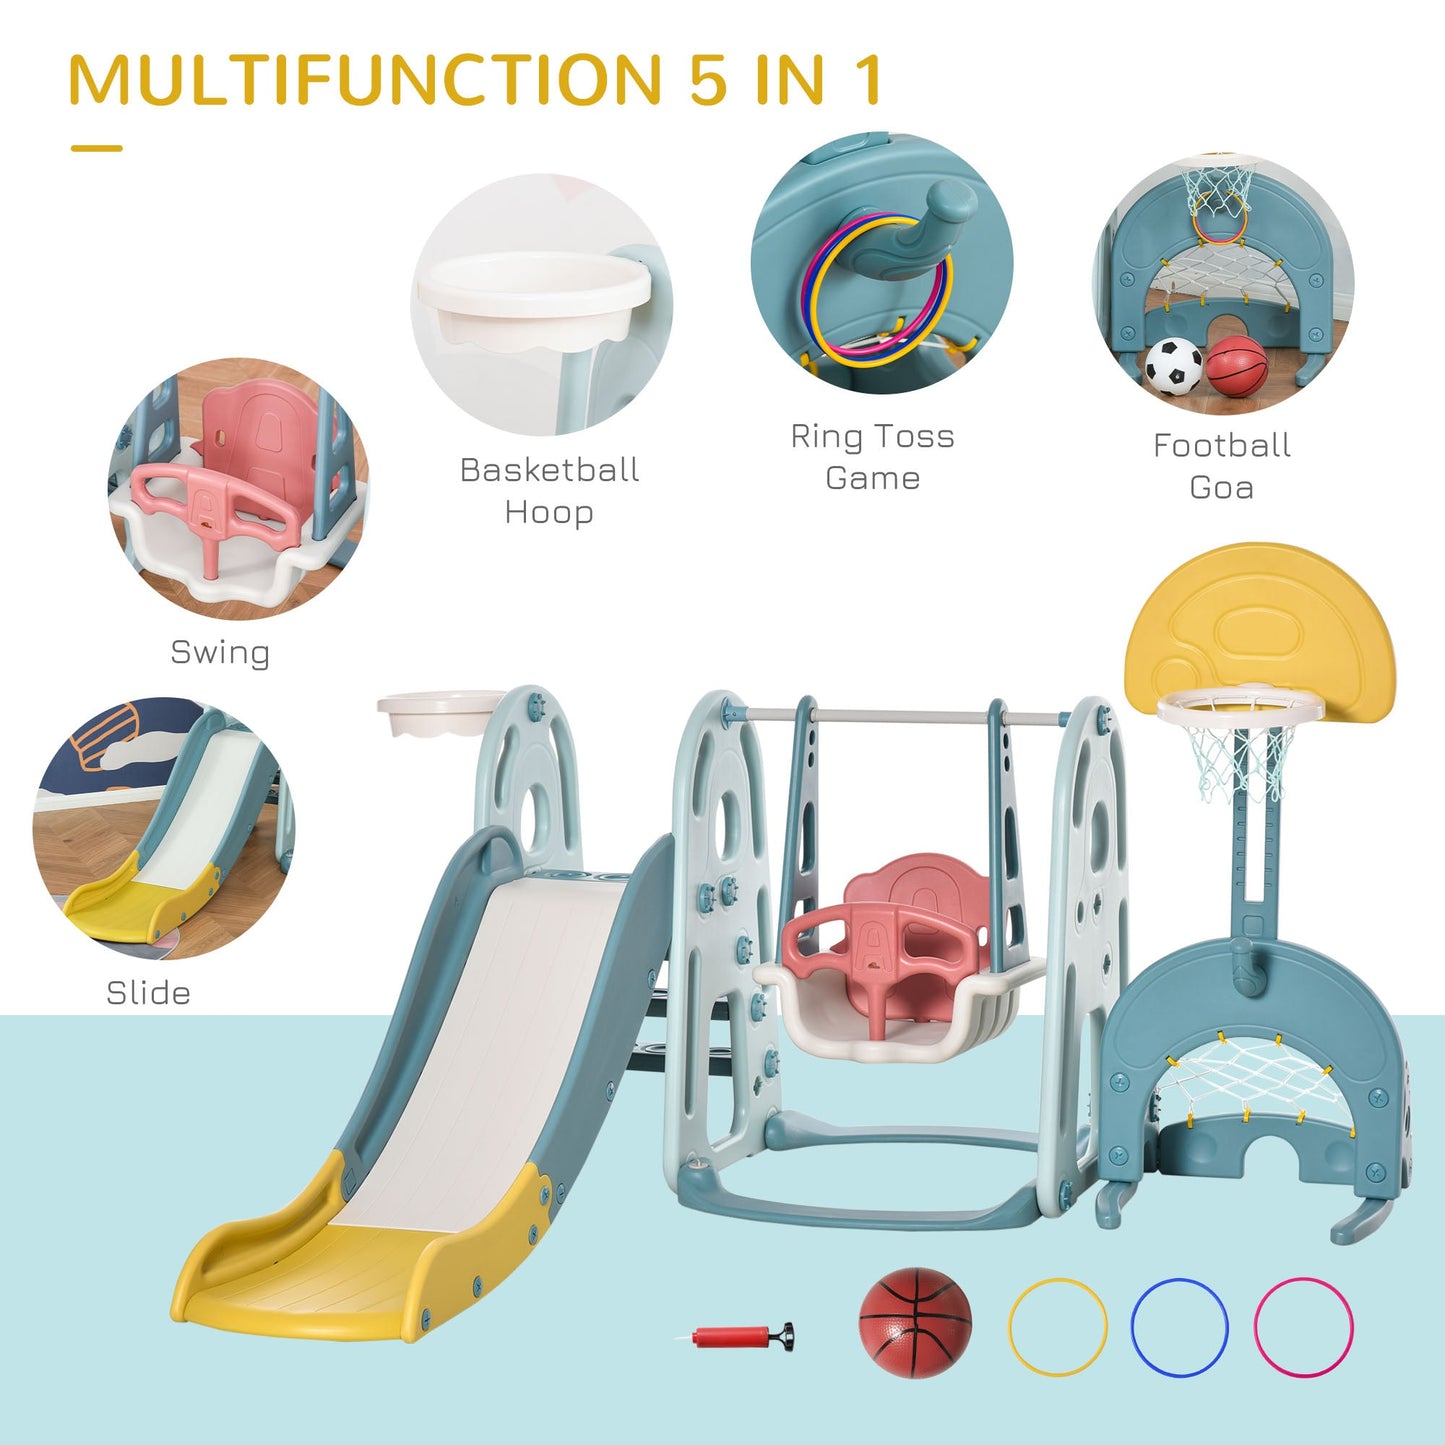 Toys and Games-5 in 1 Kids Slide and Swing Set with Basketball Hoop, Football Goal & Water-Fillable Base, Toddler Playground Activity Center Indoor Exercise Toy - Outdoor Style Company